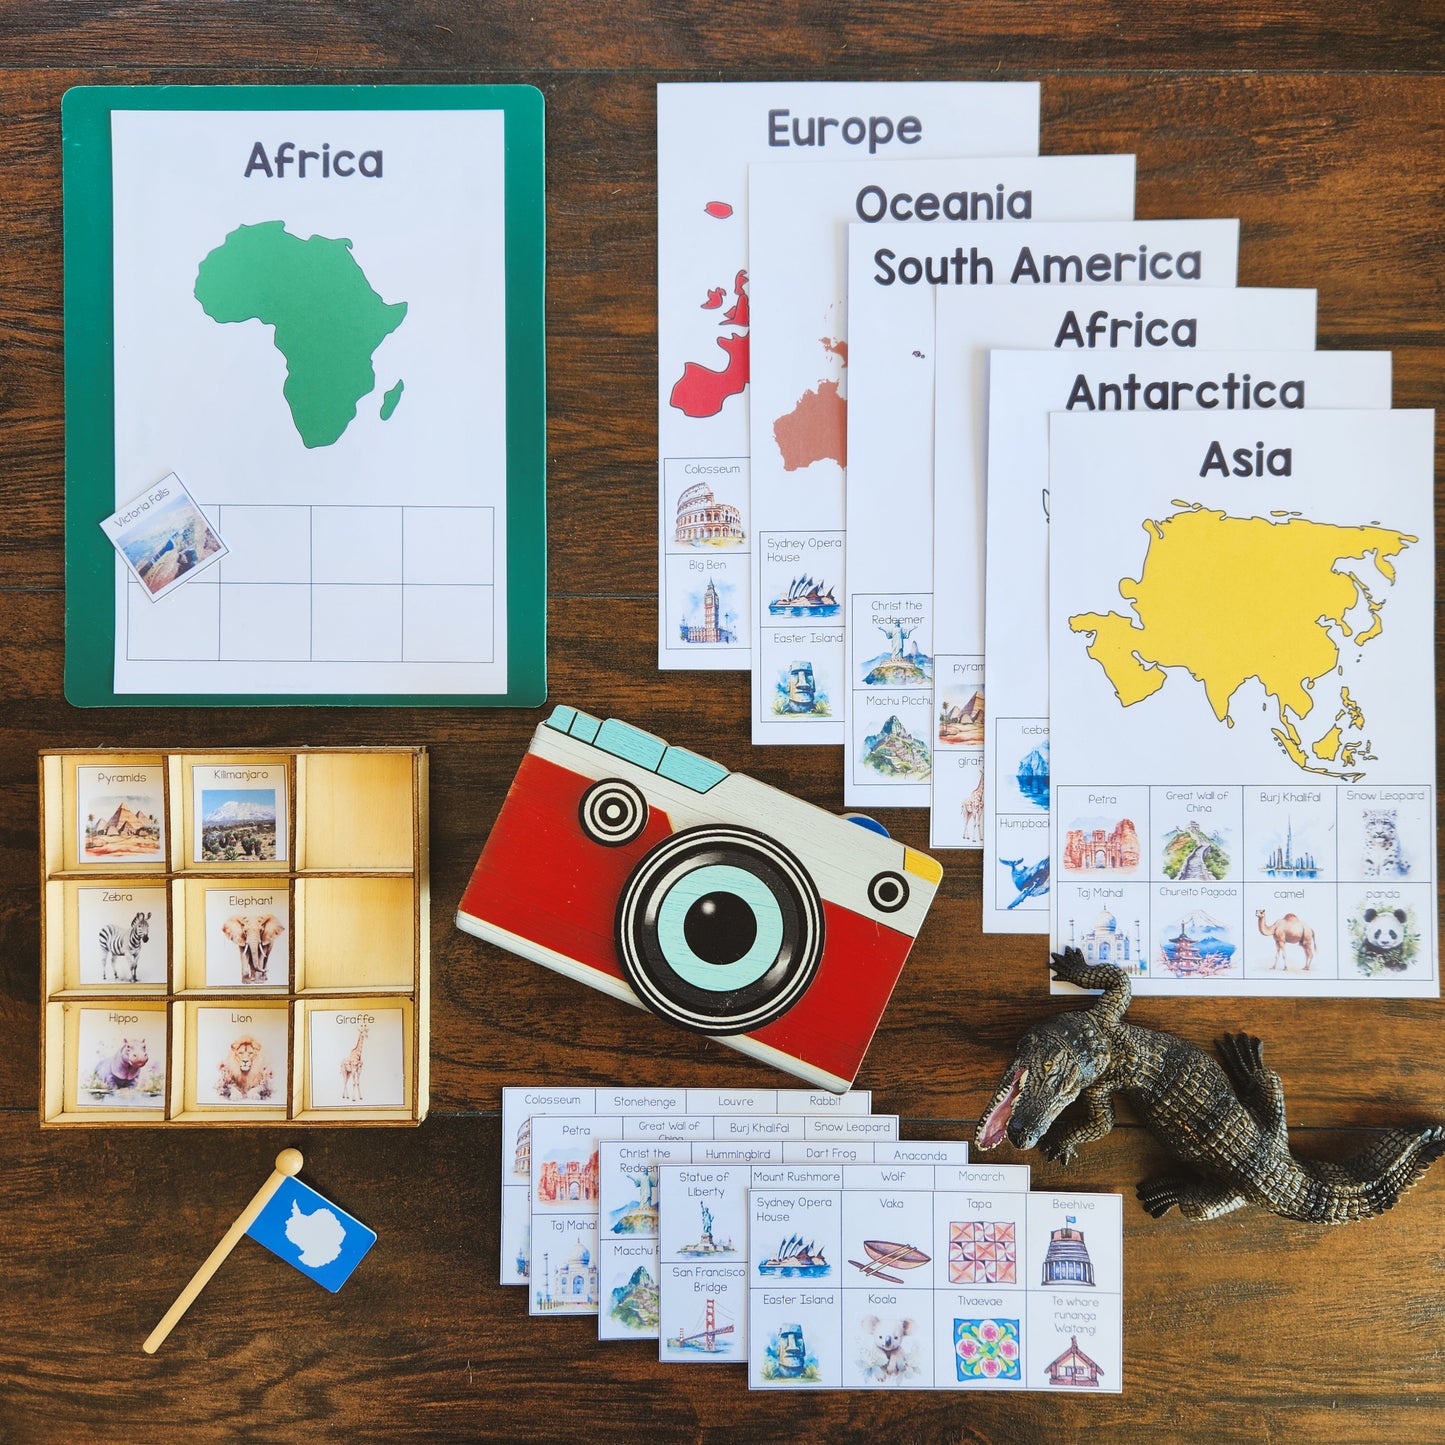 Continents sorting activity for young children